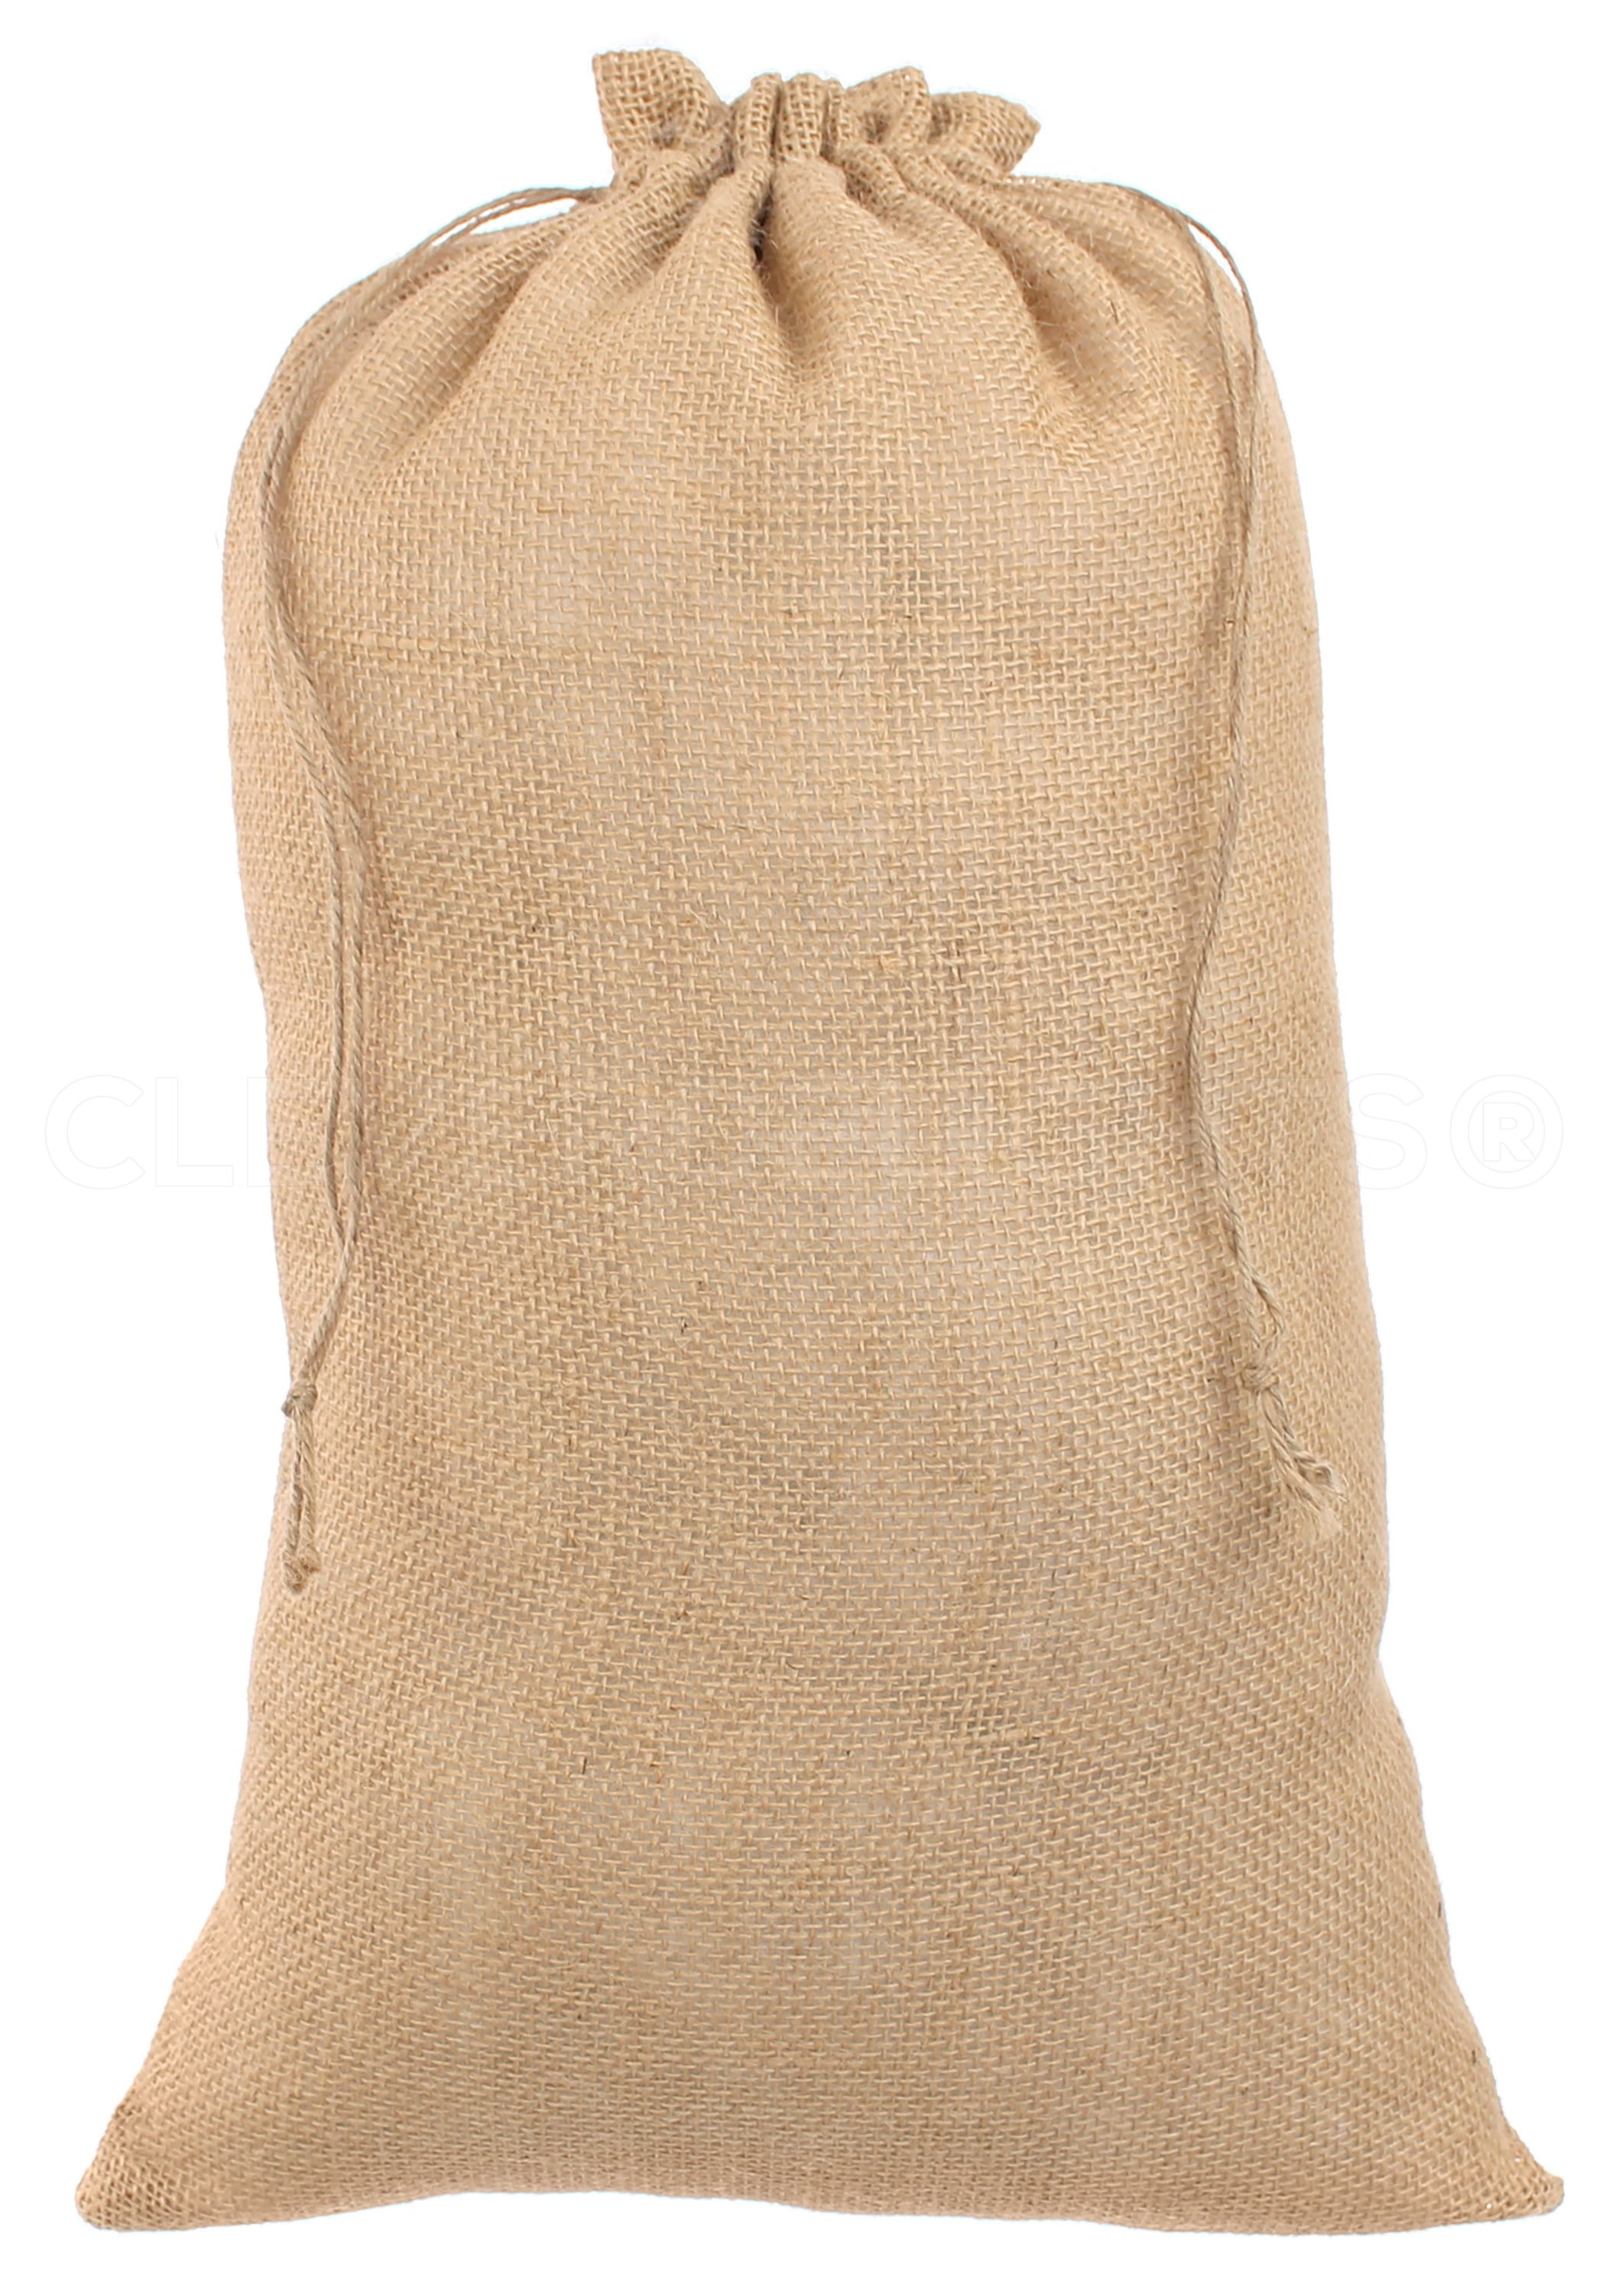 Details about   4 BURLAP BAGS  12" X 14" WITH DRAWSTRINGS  SACK GUNNY FEED BAG TOW SACK GIFT 